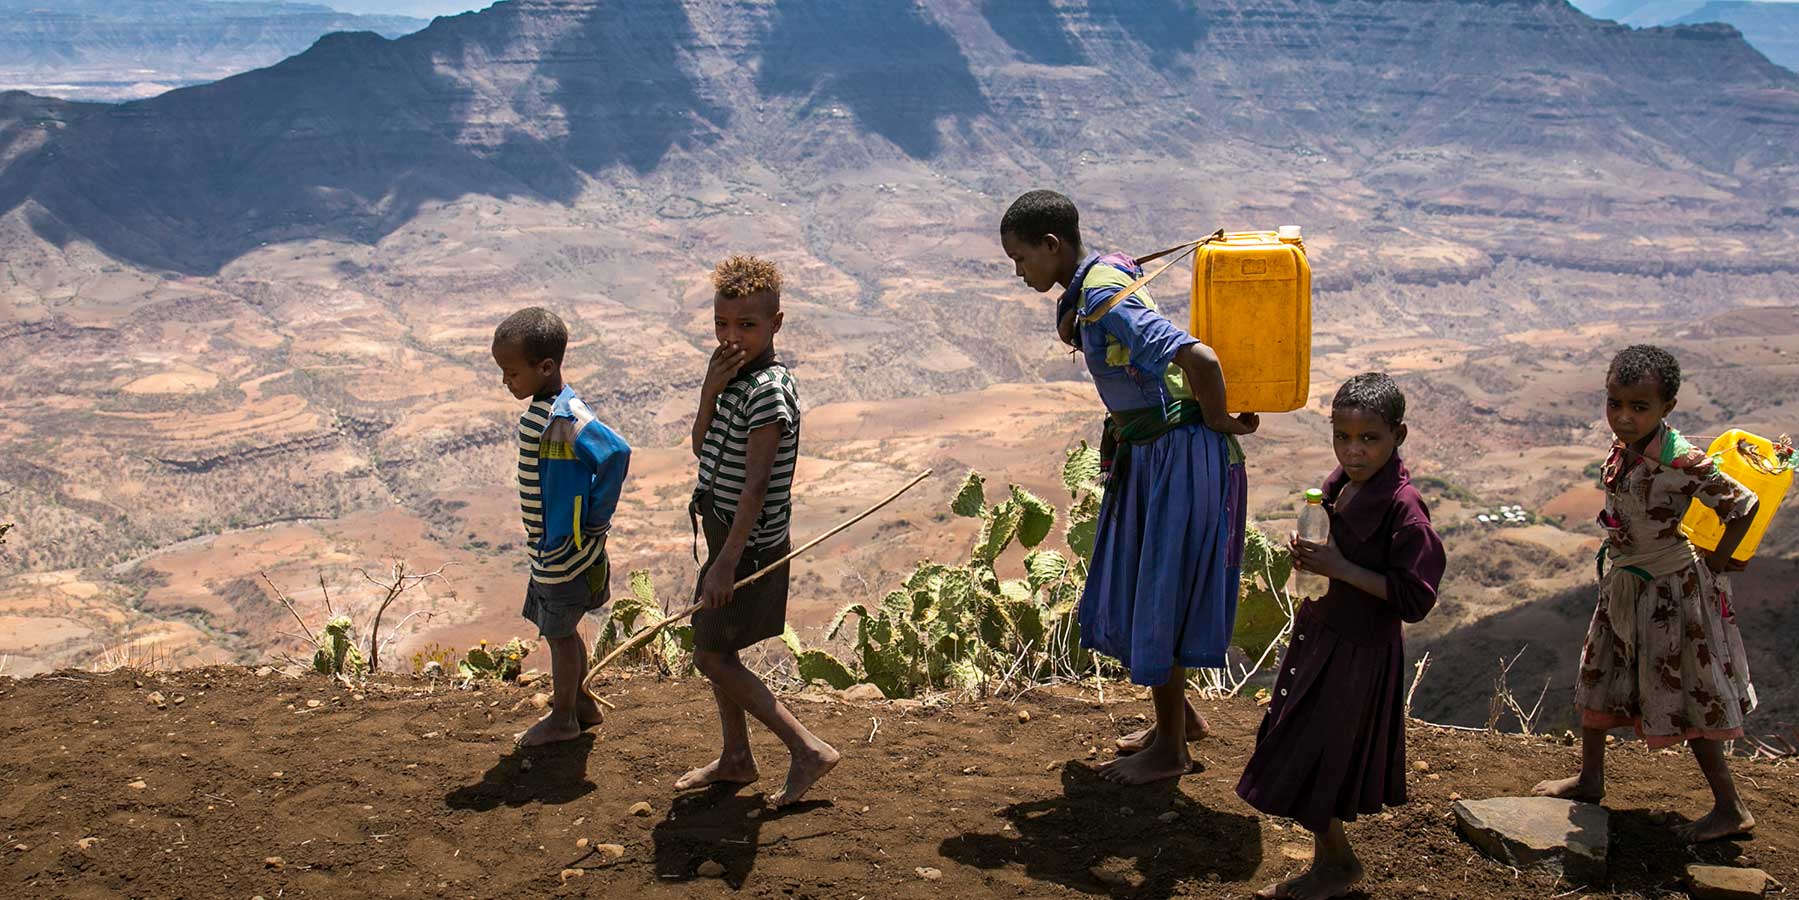 Children collect water during an El Niño-influenced drought